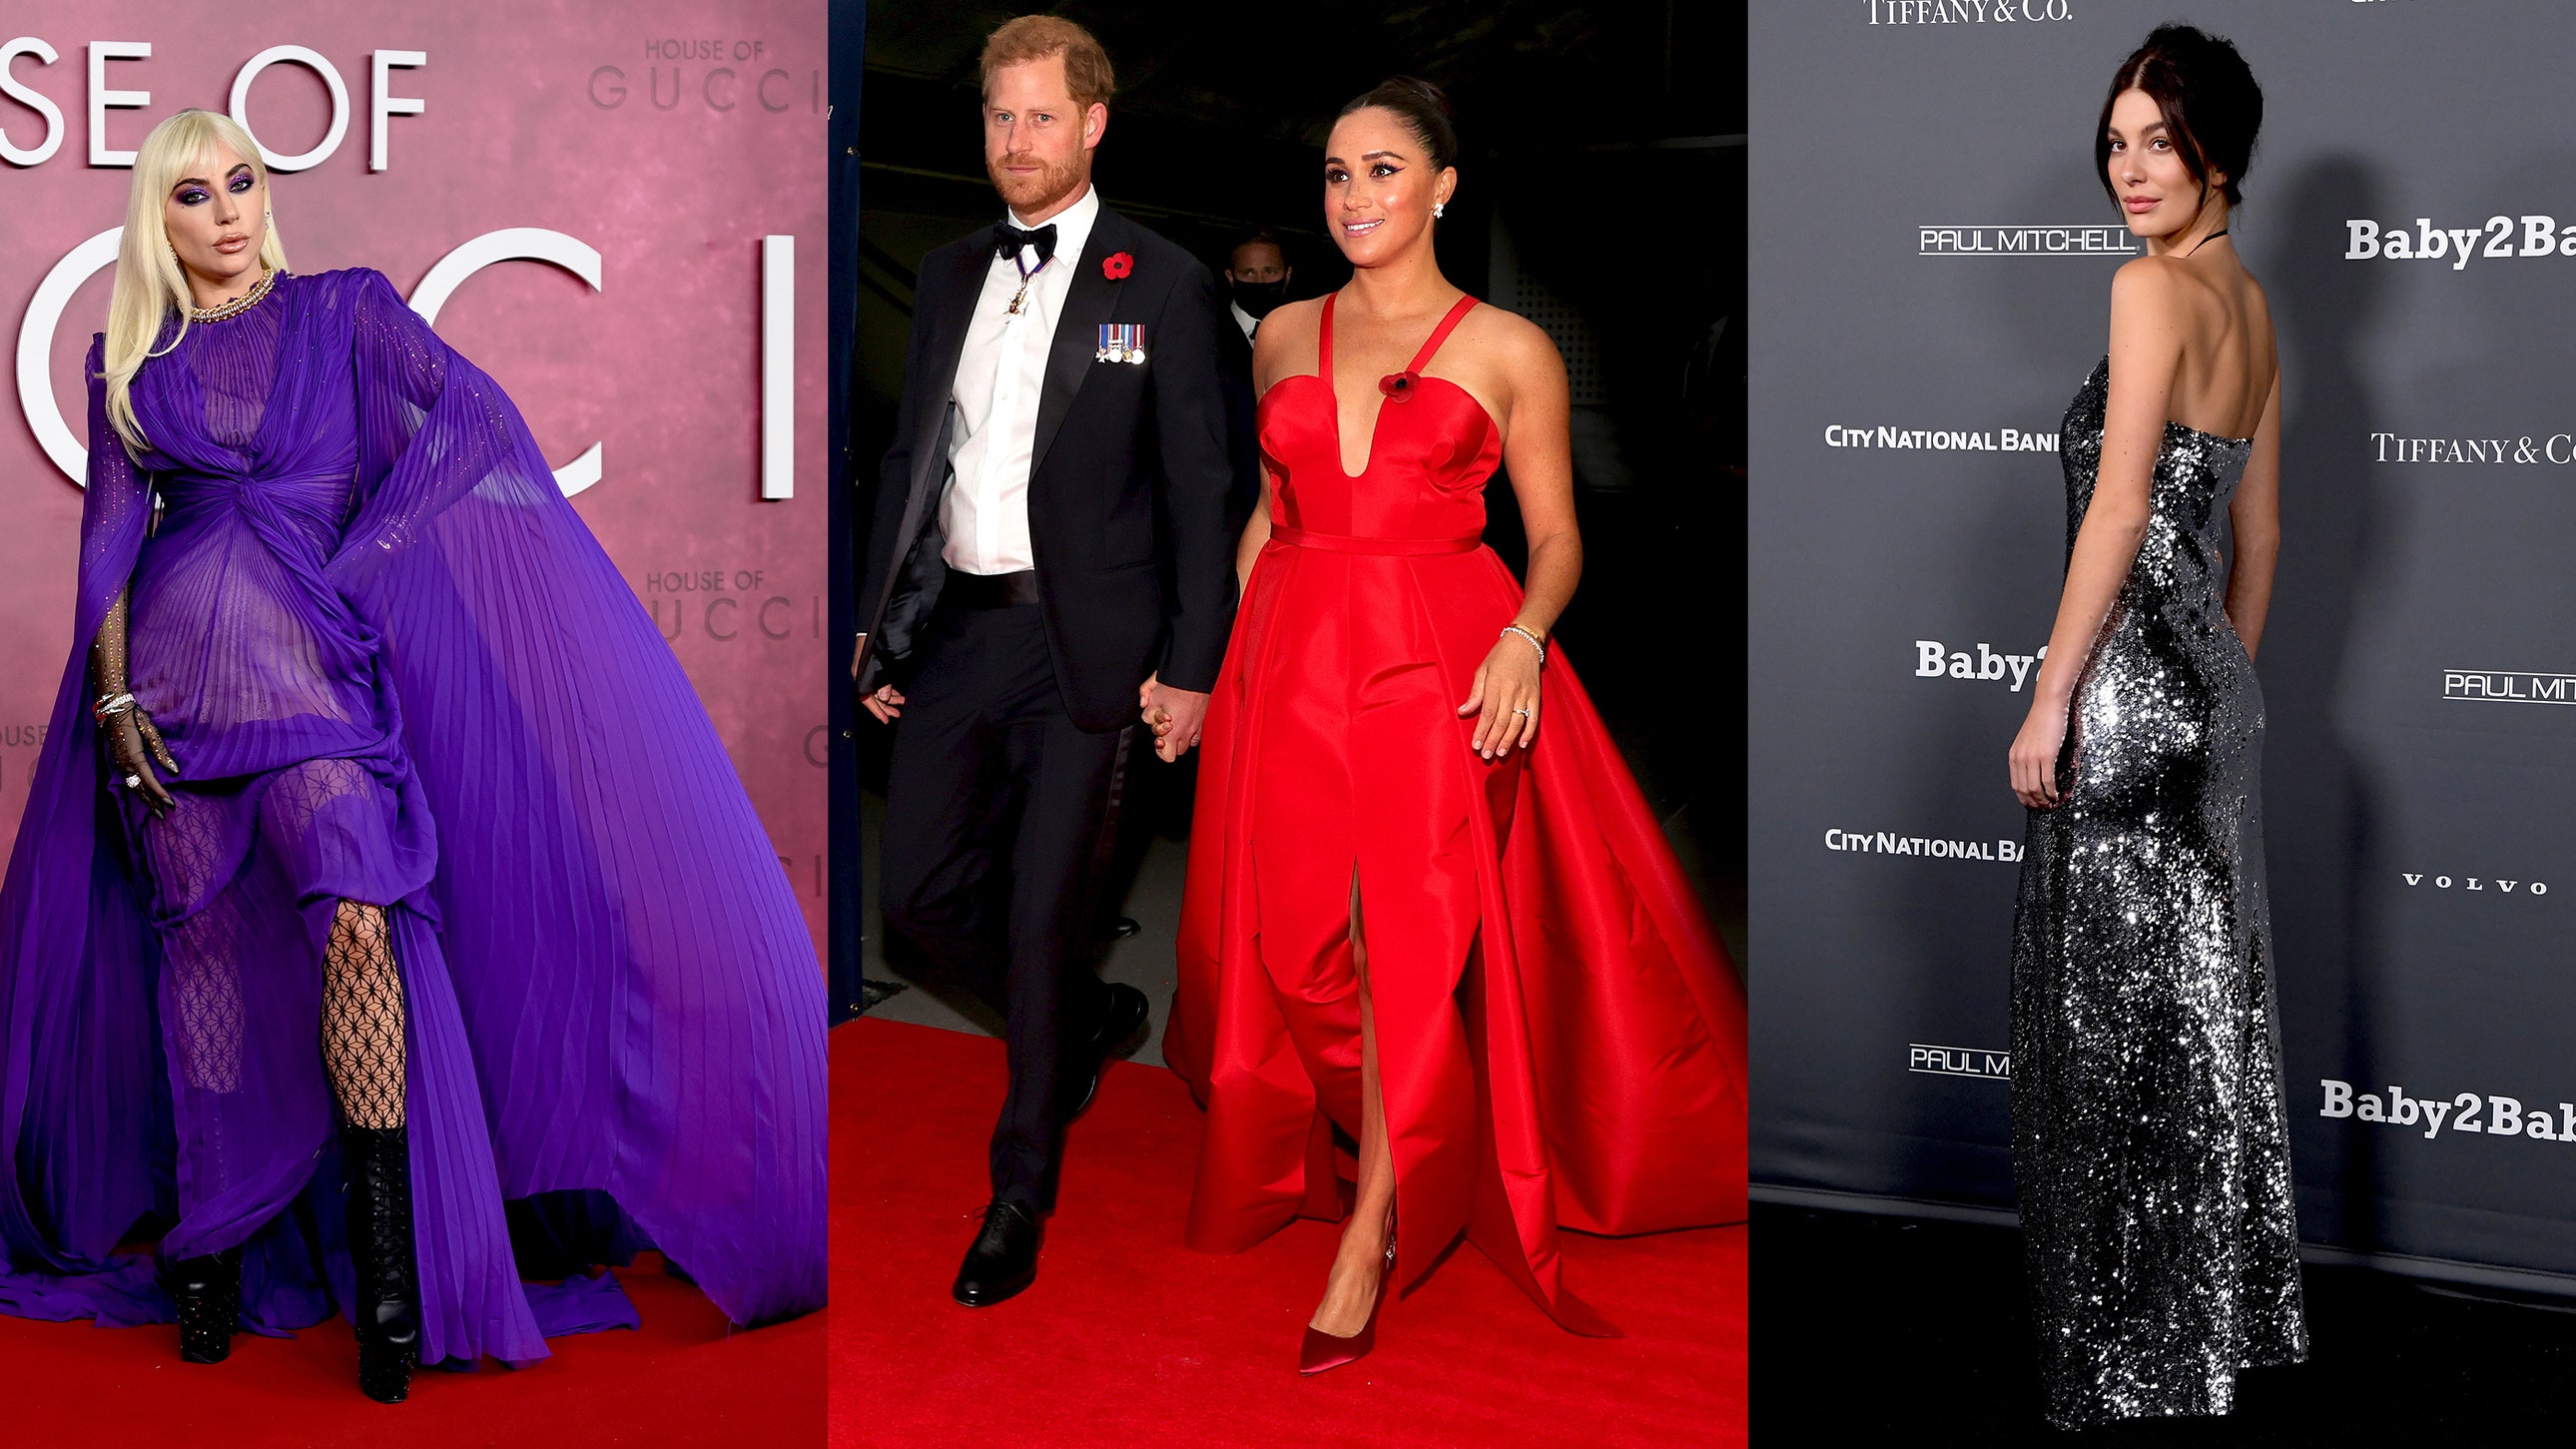 This Week, the Best Dressed Stars Wanted Glamour With Personality